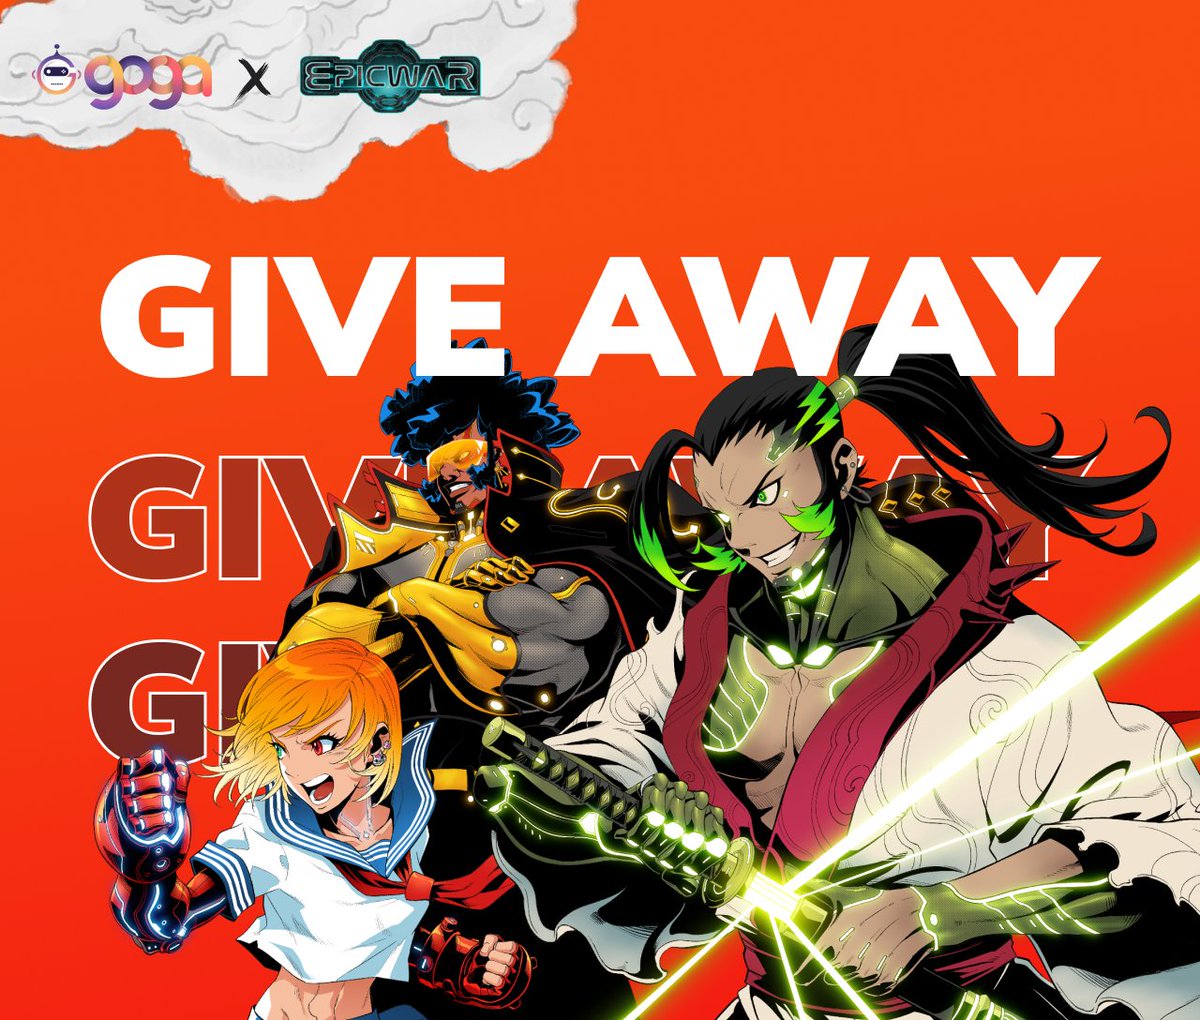 EPIC WAR x GOGA Partnership Giveaway🔥 We are giving away 10 OASYX Genesis NFTs worth $1000 to 10 lucky winners! To enter: 1️⃣ Follow @goga_app & @the_epic_war 2️⃣ RT + Like + Tag friends 3️⃣ Complete quests: app.quest3.xyz/quest/74226789… Referral: forms.gle/rfLyFWybuE5GfQ… ⏰6 days